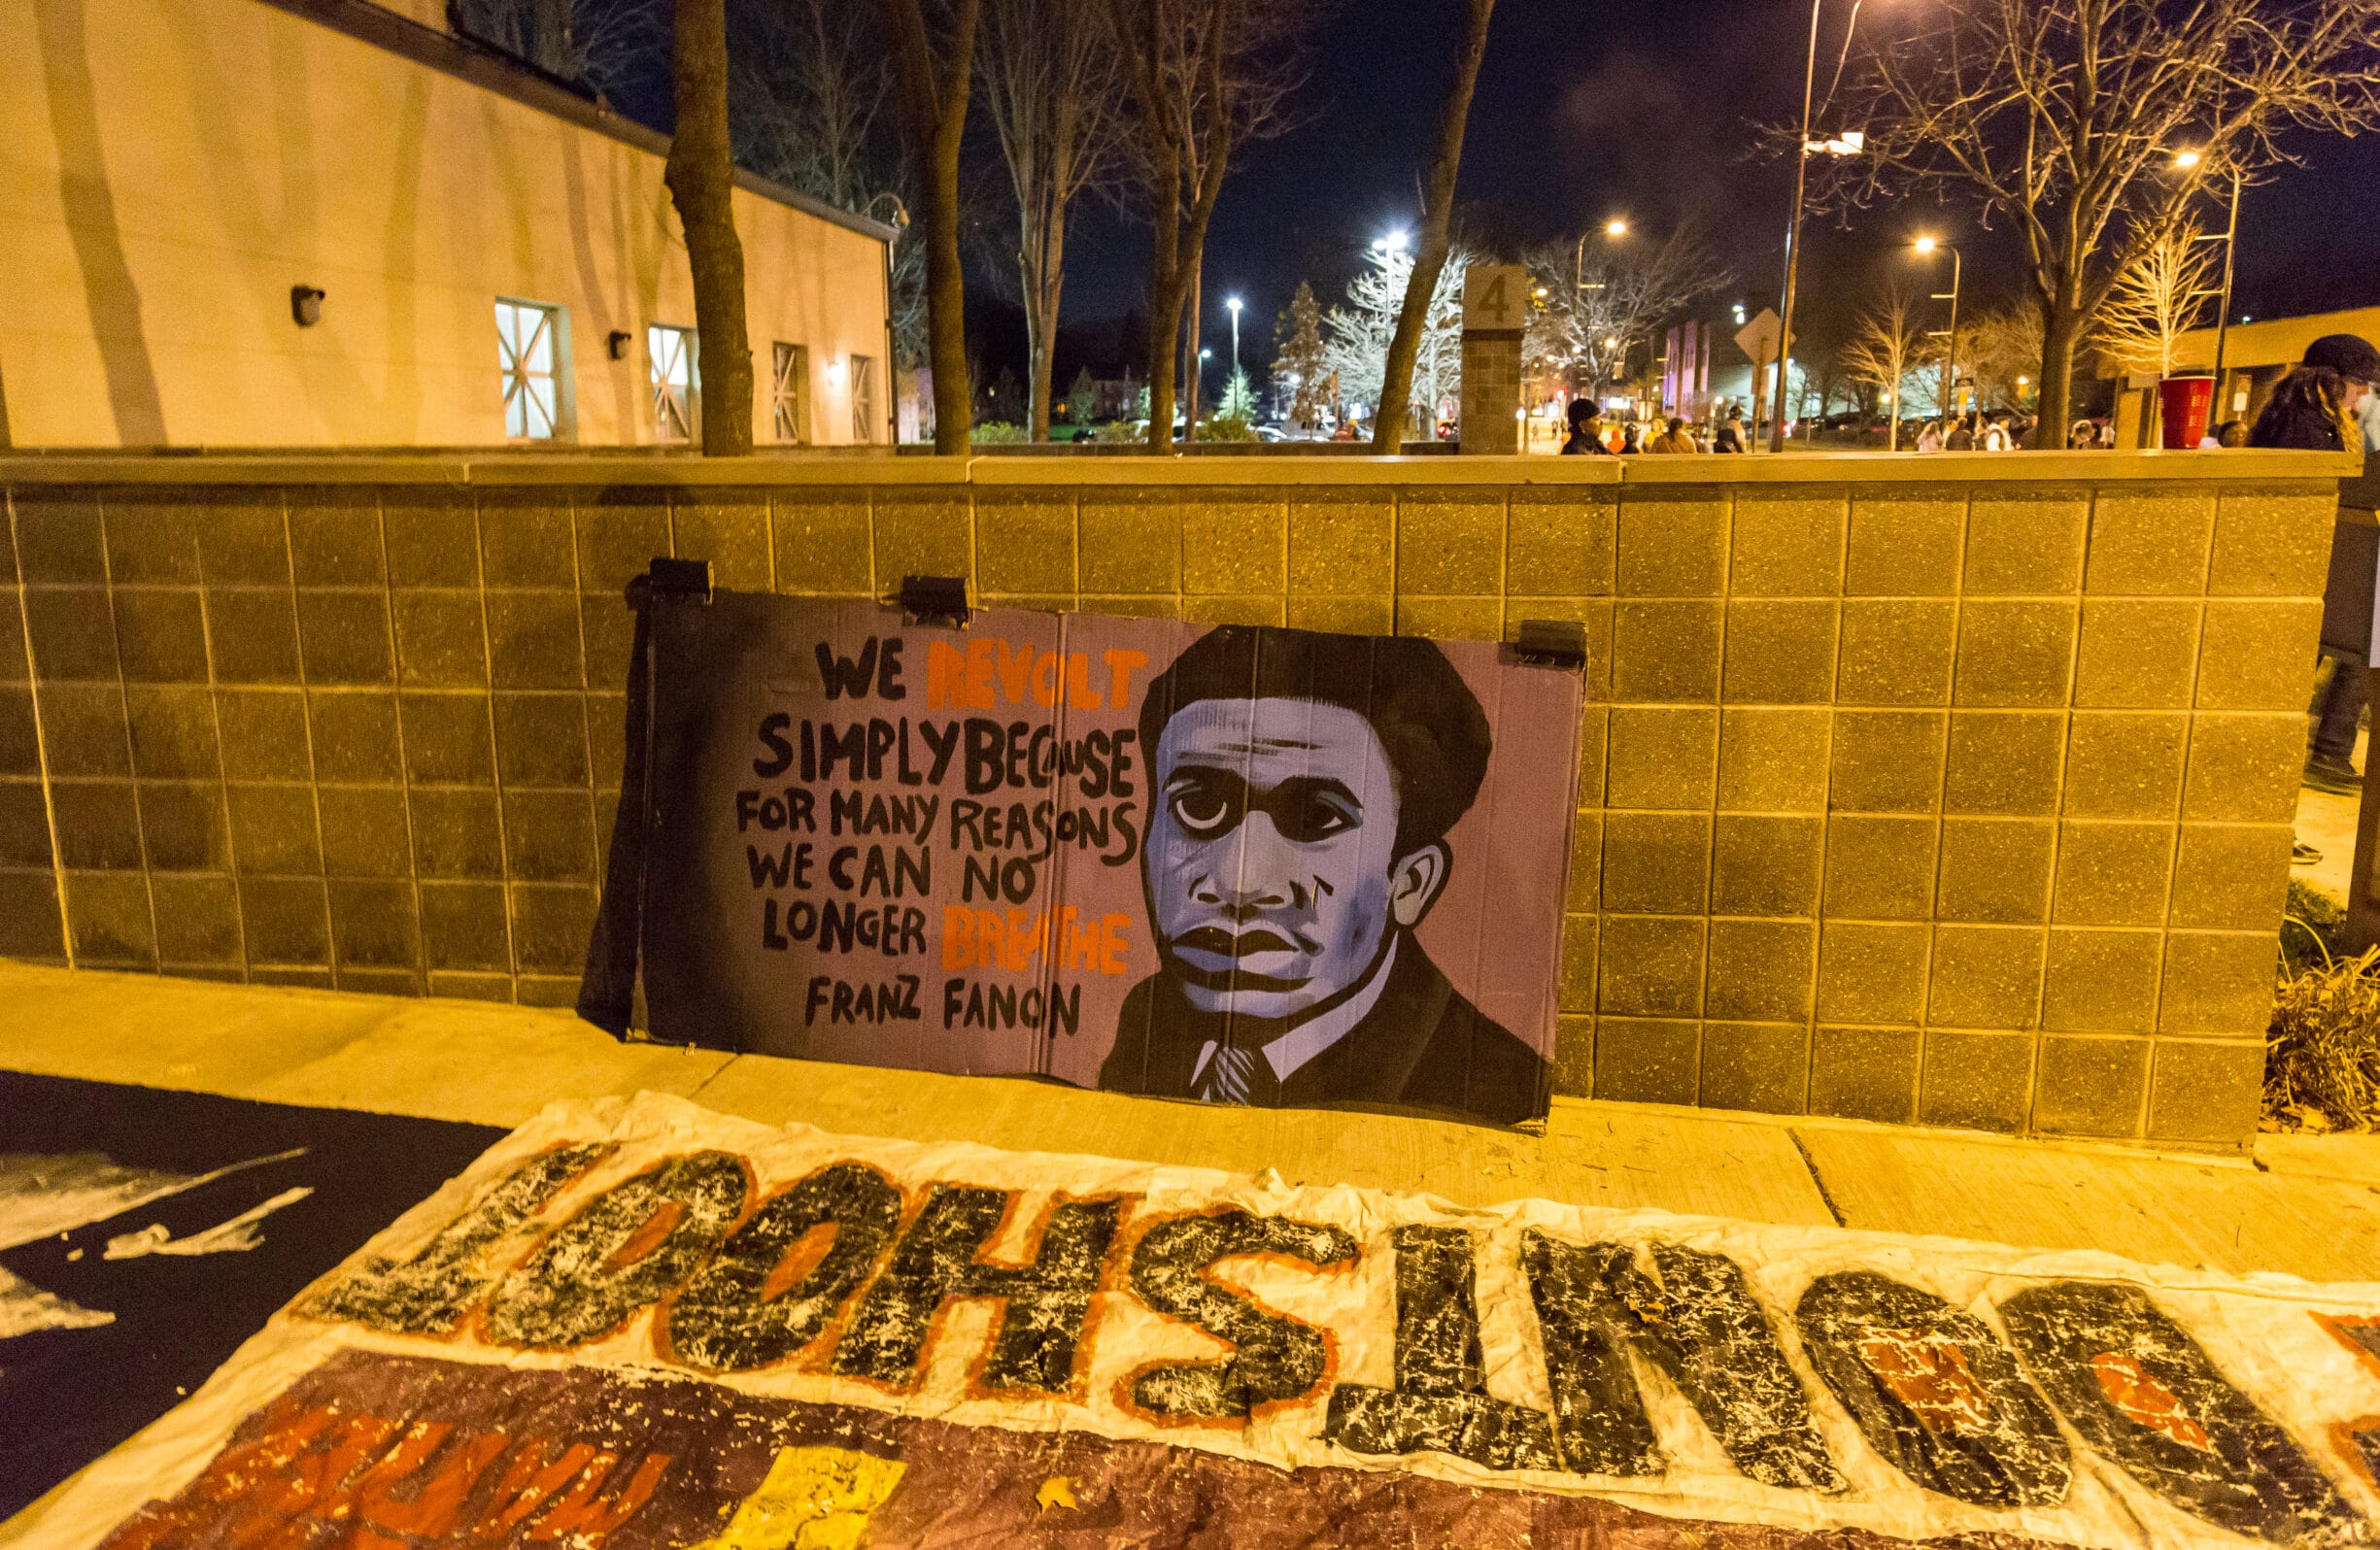 Banner outside the Minneapolis Police Department fourth precinct, Plymouth Avenue, following the officer-involved shooting of Jamar Clark on November 15, 2015. The quote says: "We revolt simply because for many reasons we can no longer breathe." -Frantz Fanon. Photo by Tony Webster. (CC BY 2.0).